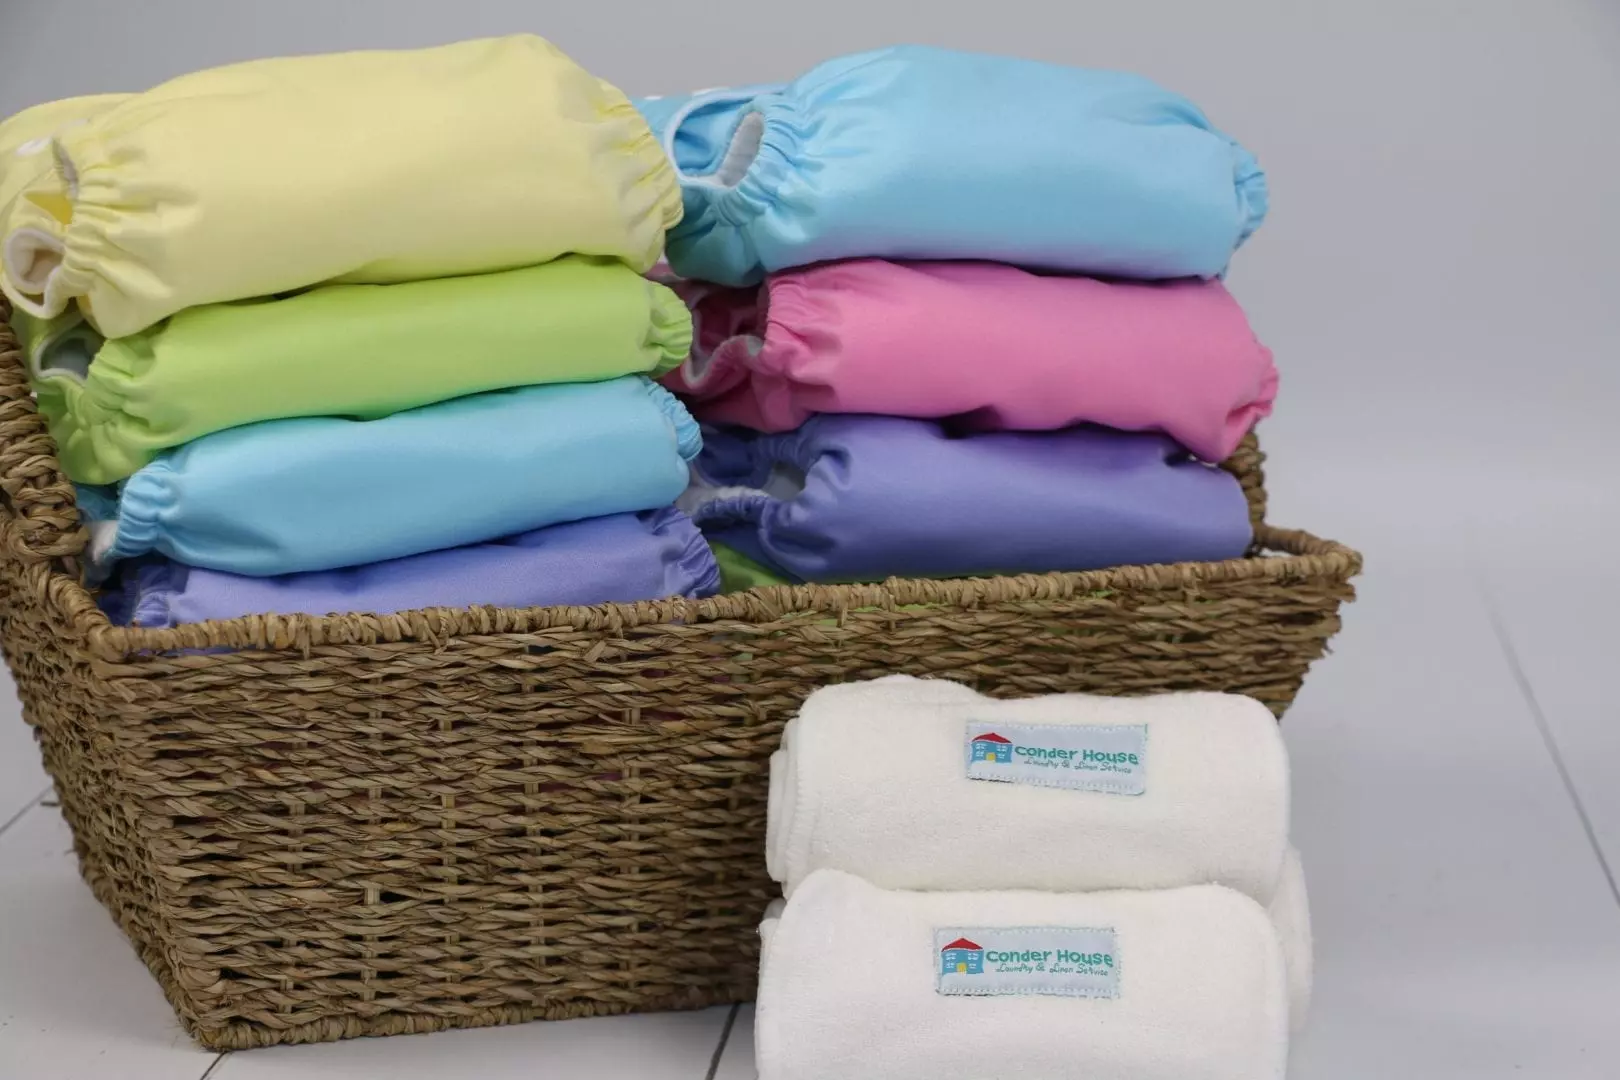 Introduction to Modern Cloth Nappy Service in Early Education